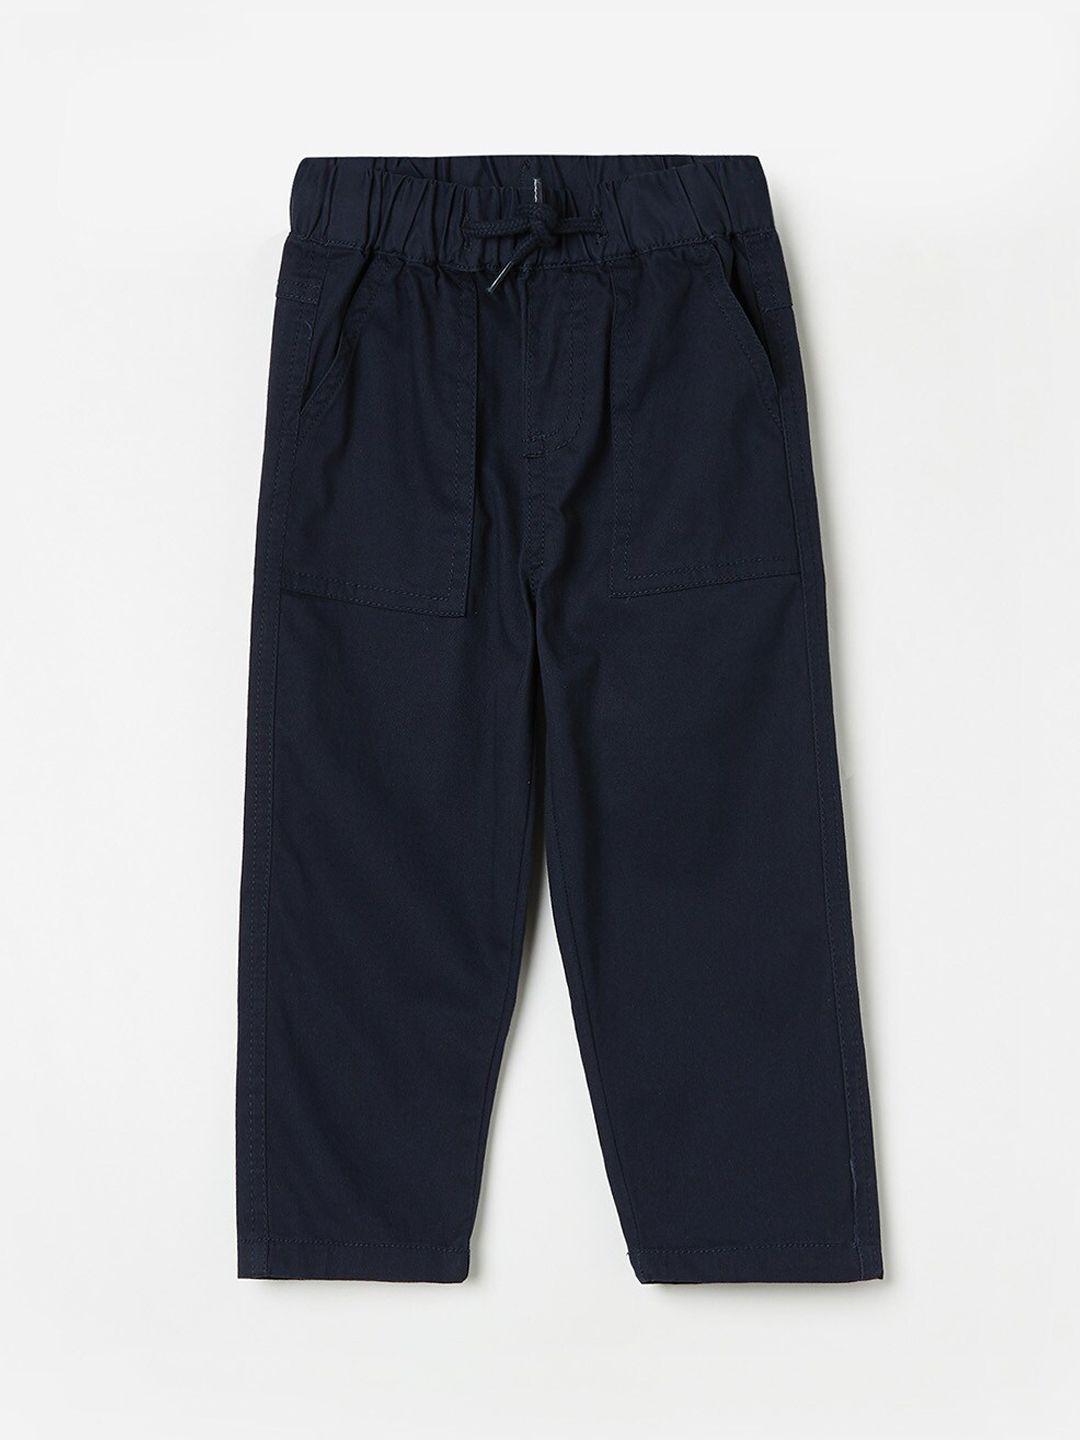 juniors by lifestyle boys navy blue trousers